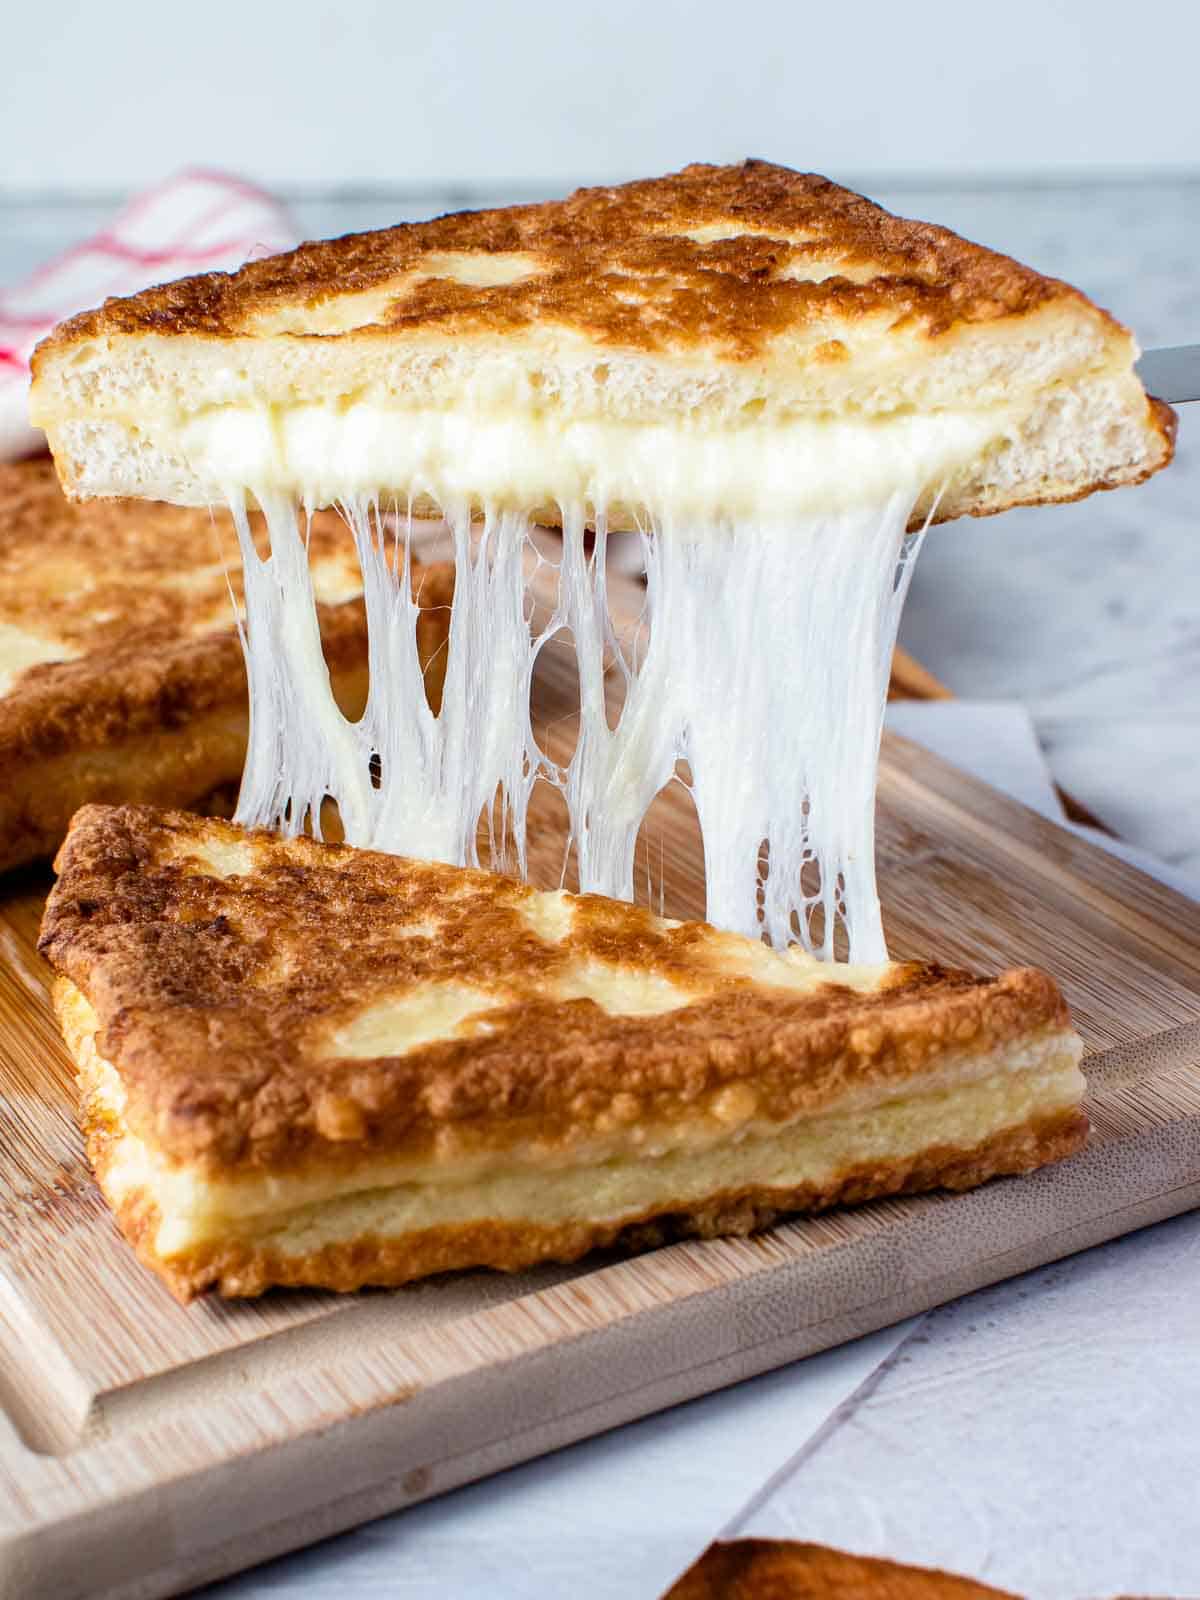 Mozzarella in carrozza cut in half and showing cheese pull.